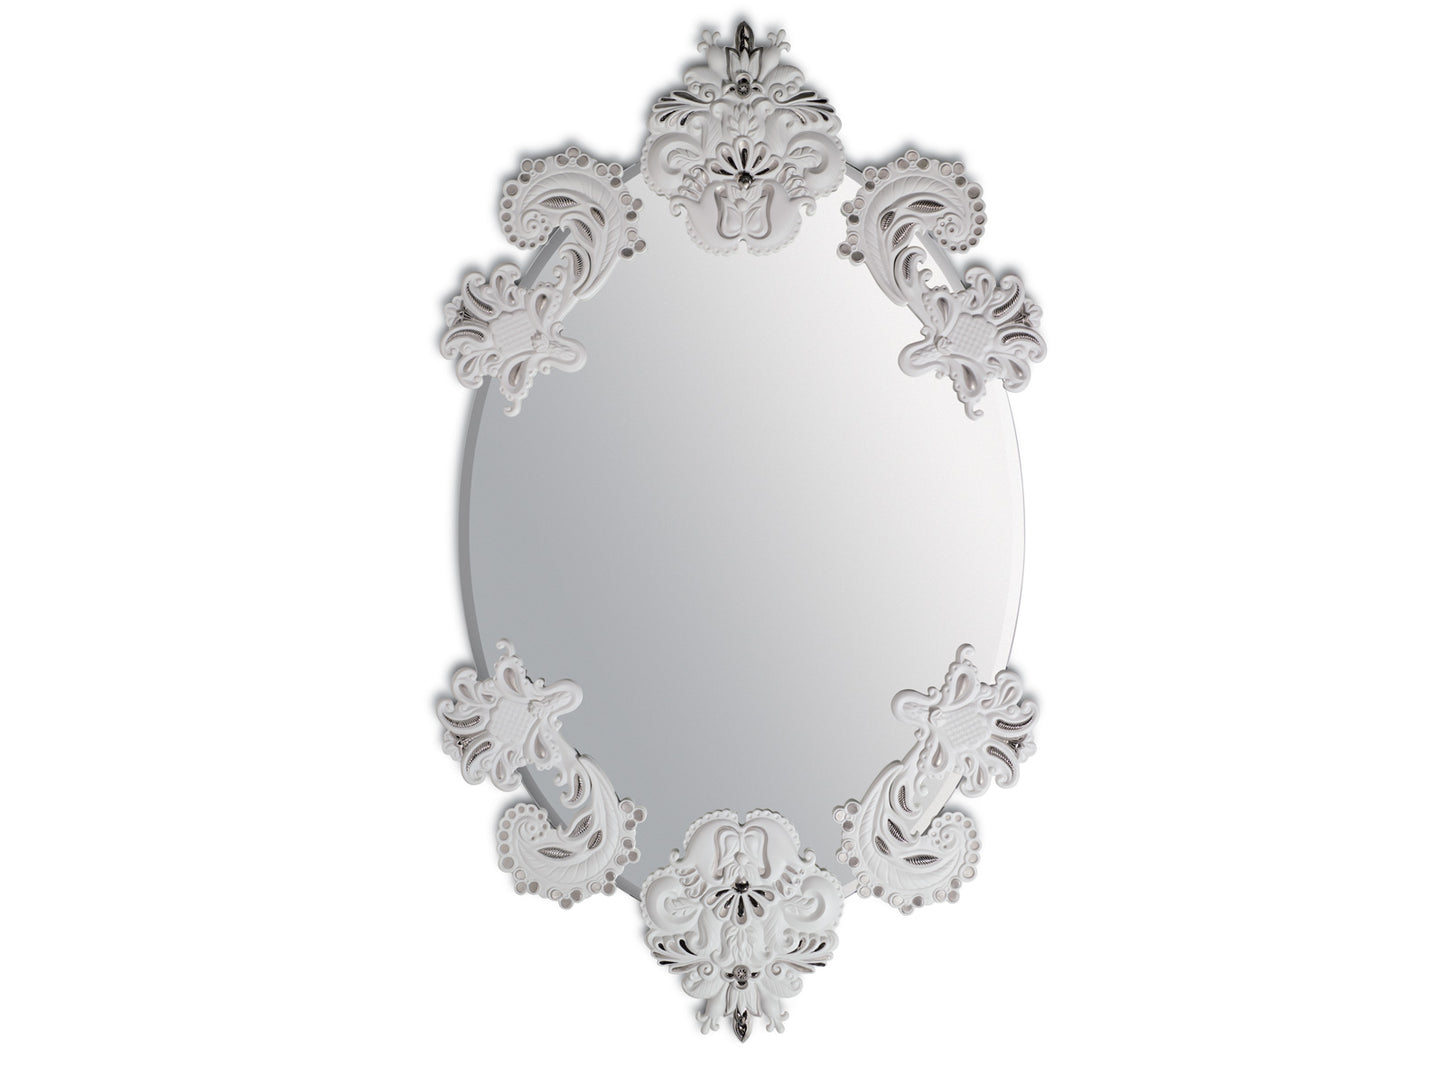 Lladro Oval Mirror Without Frame - White & Silver